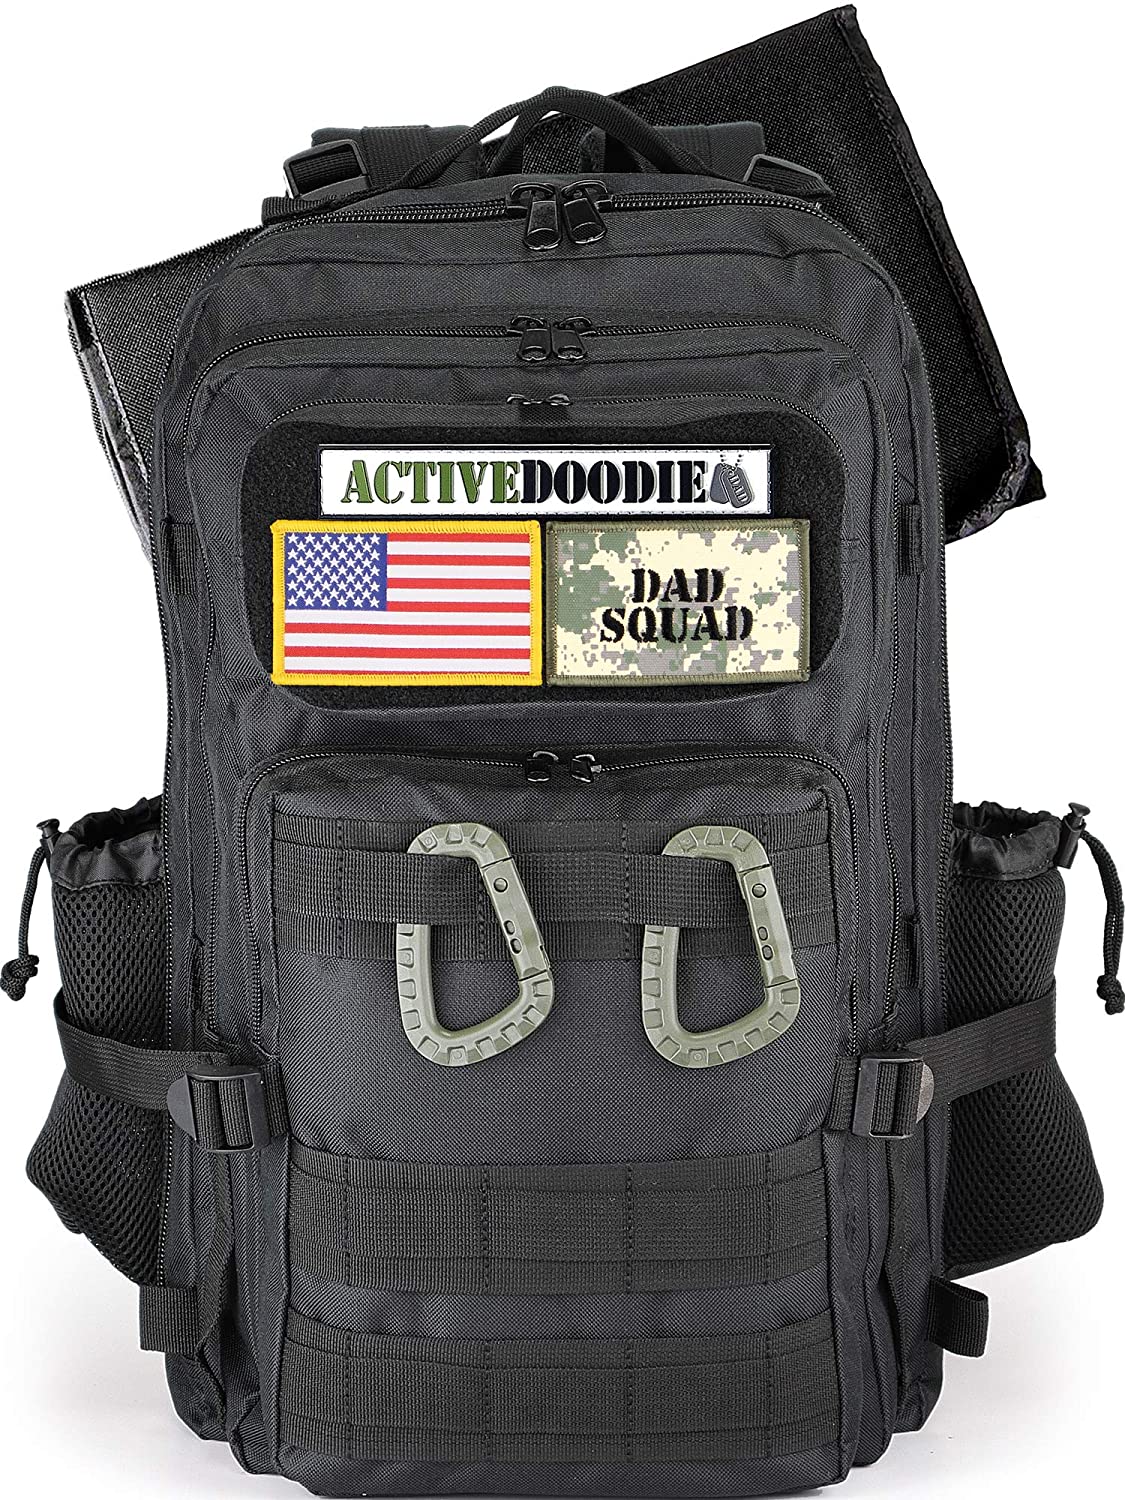 ActiveDoodie Sweat Wicking Back & Straps Diaper Bag For Dads